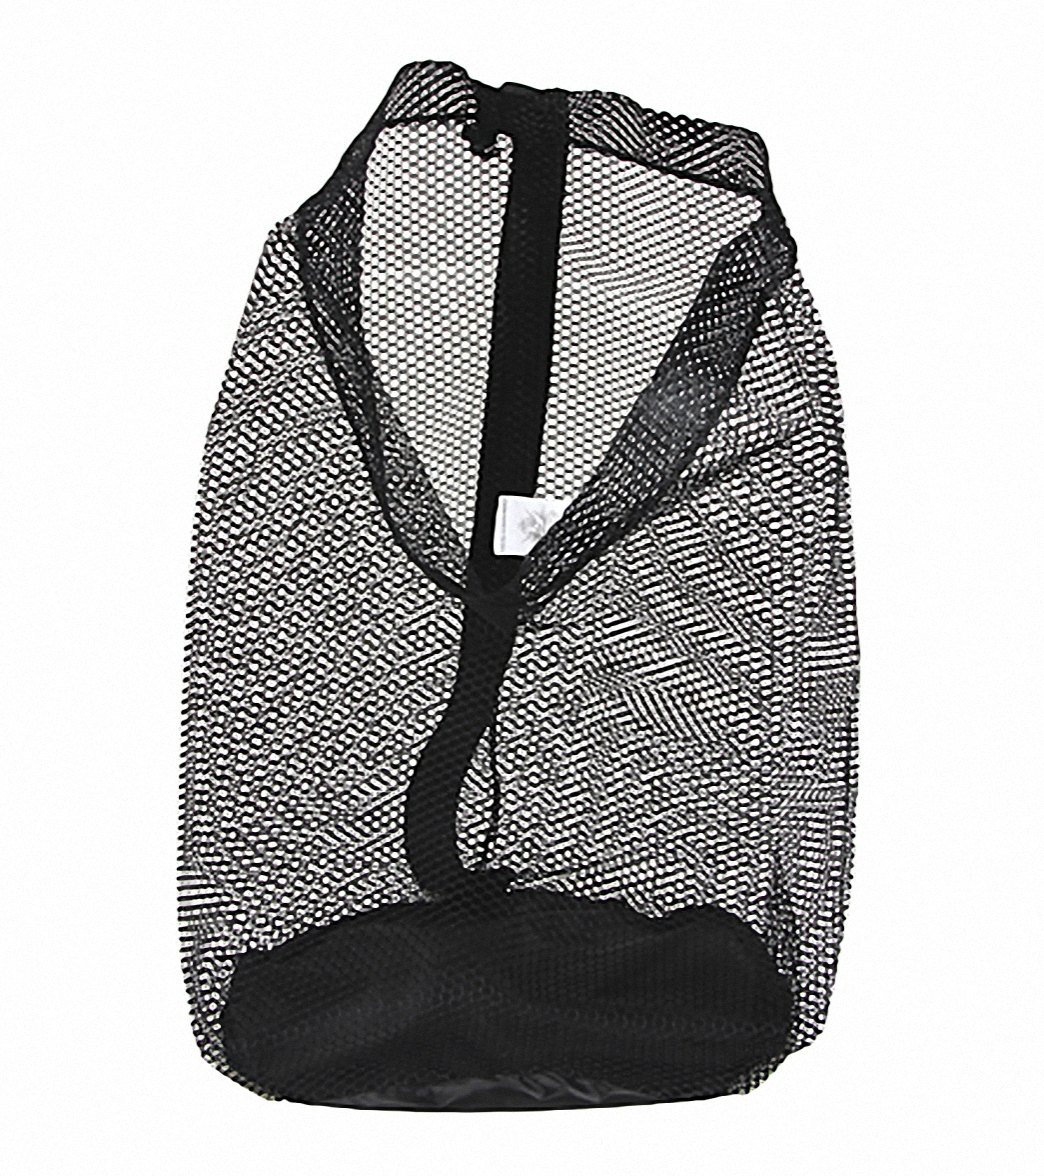 mesh for bags